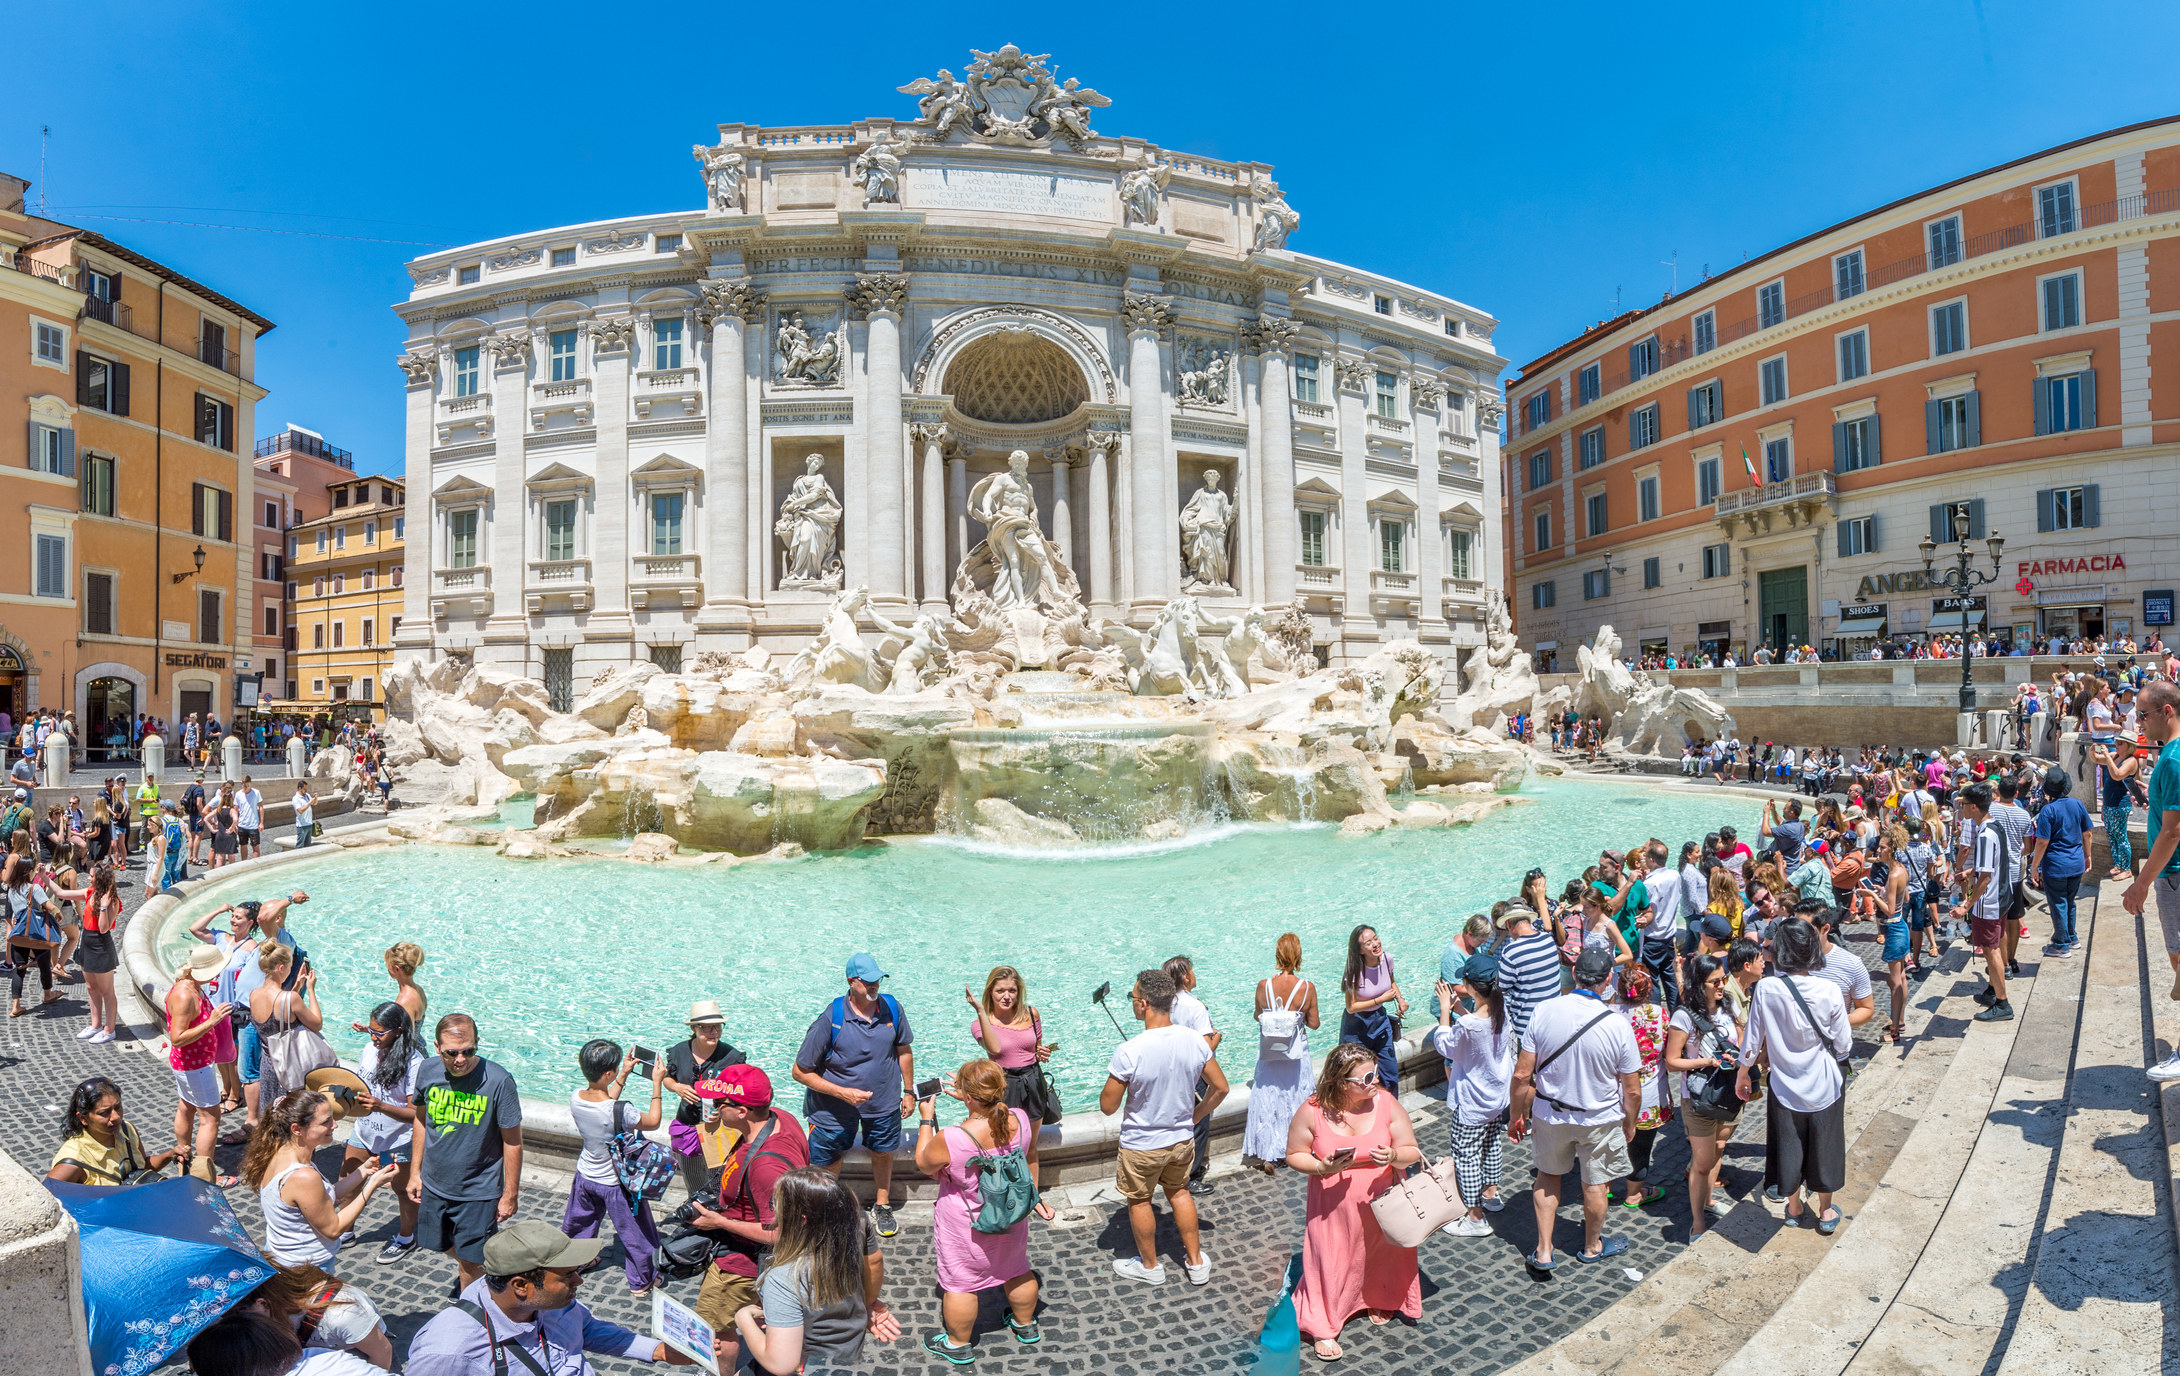 Trevi Fountain surrounded by tourists.